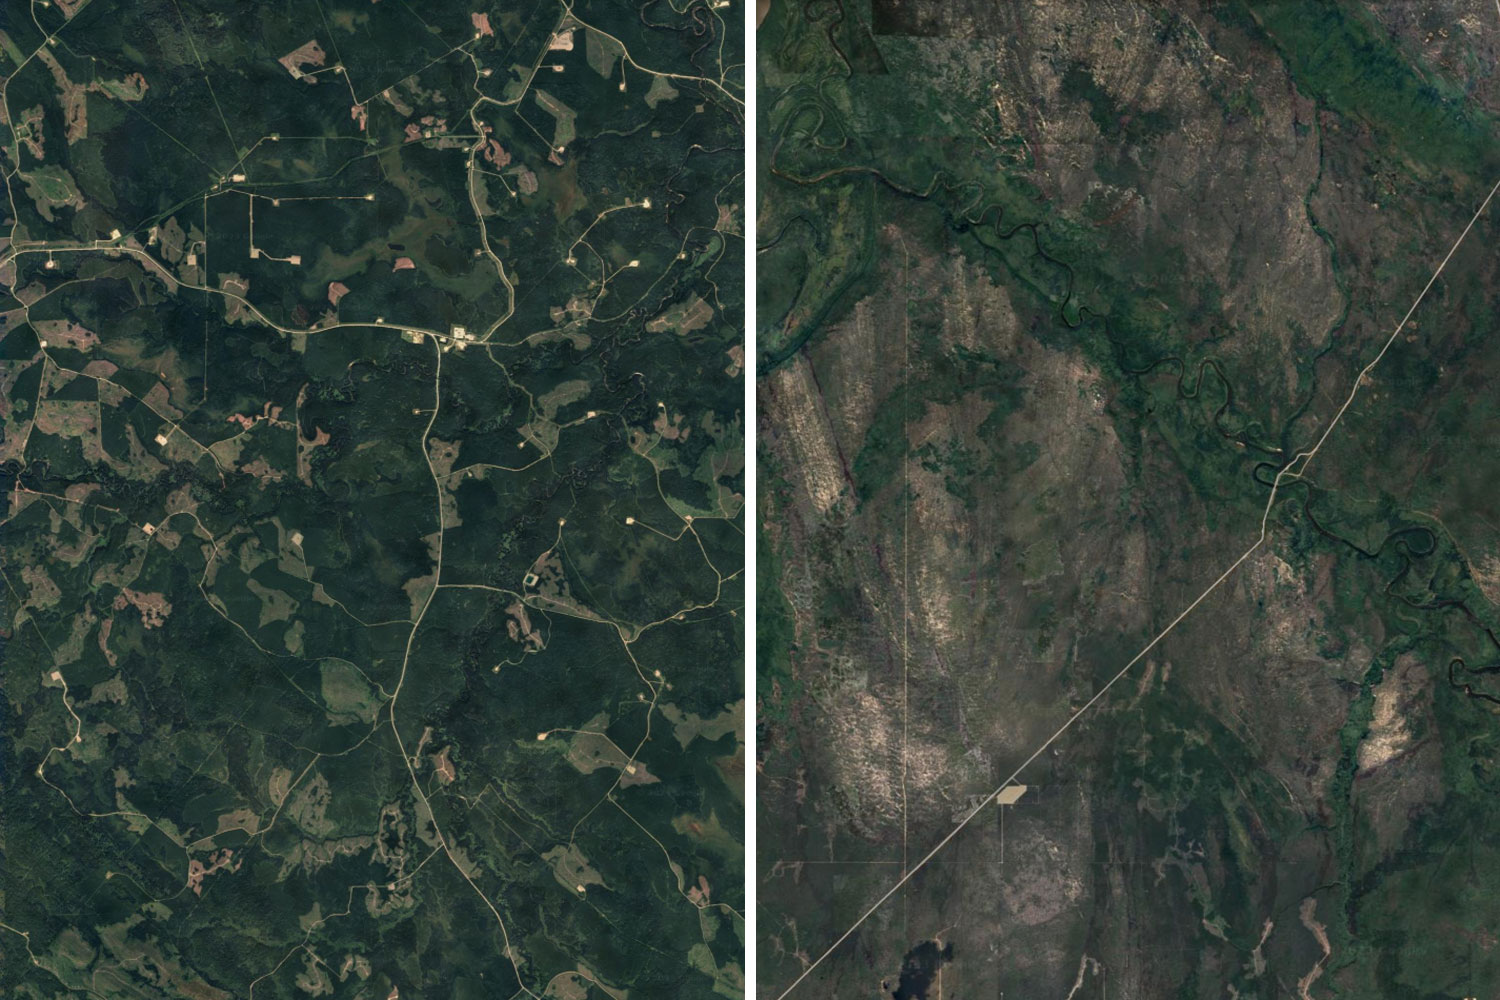 left, many small footprints created by harvestting; right single large disturbance footprint from a wildfire